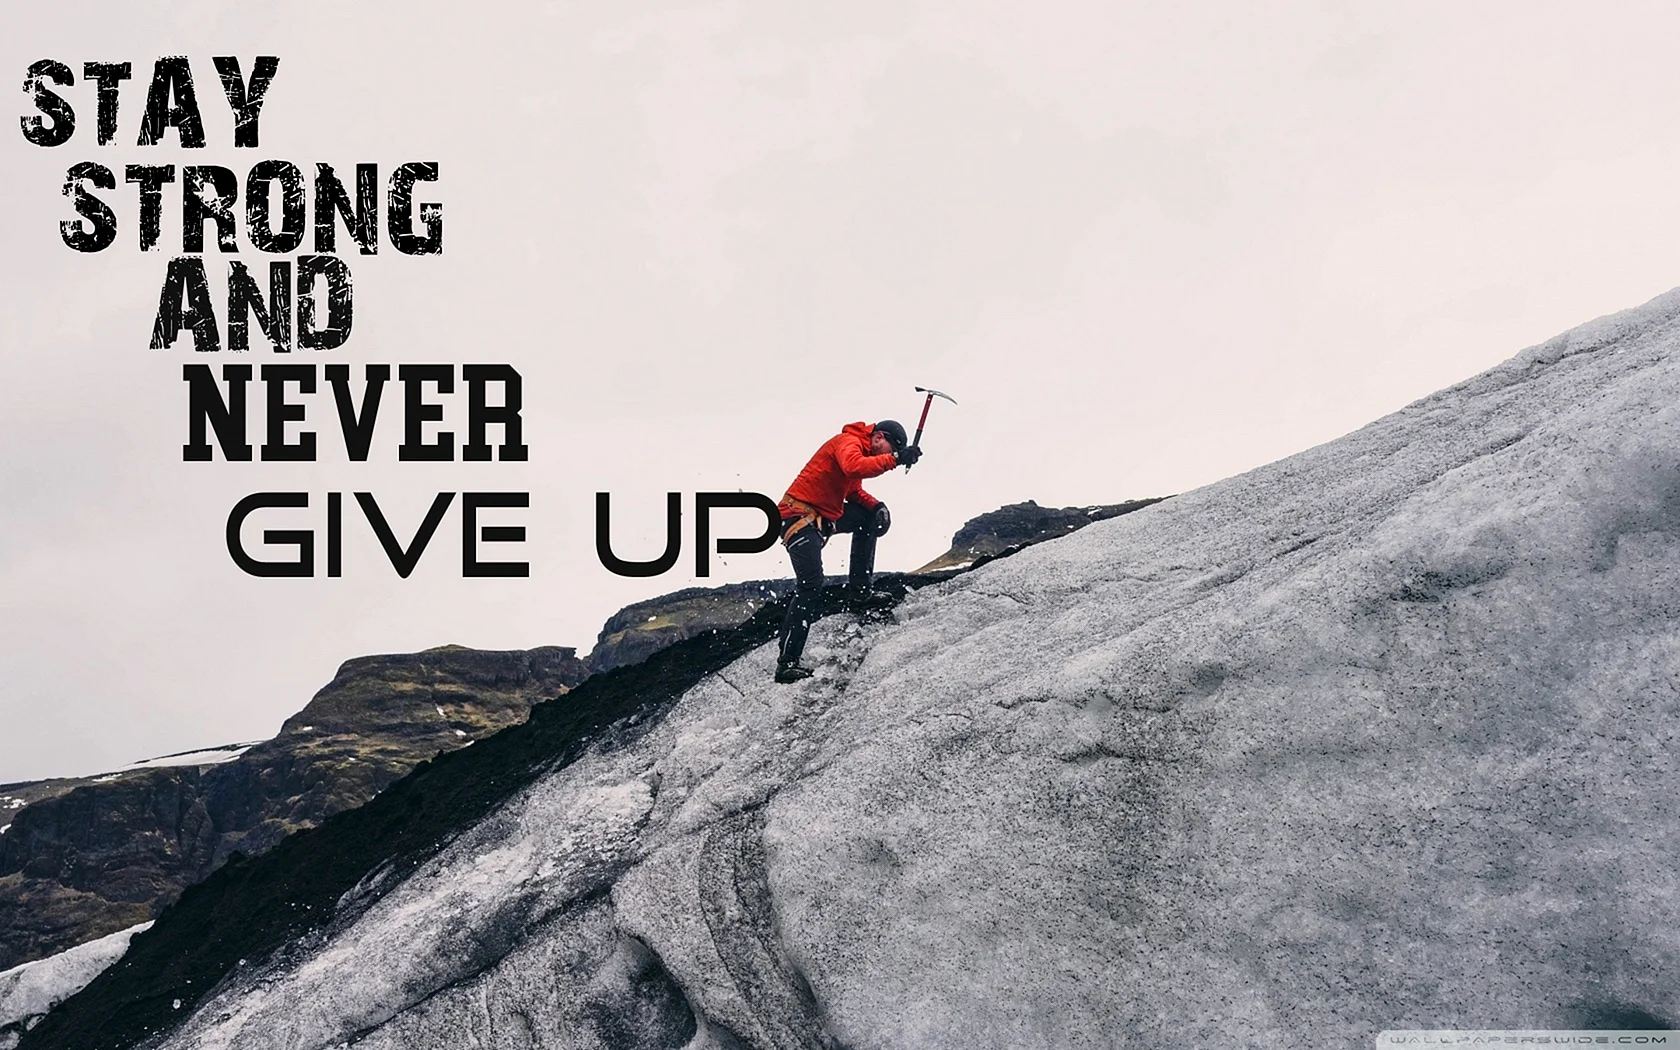 Never Give Up Wallpaper